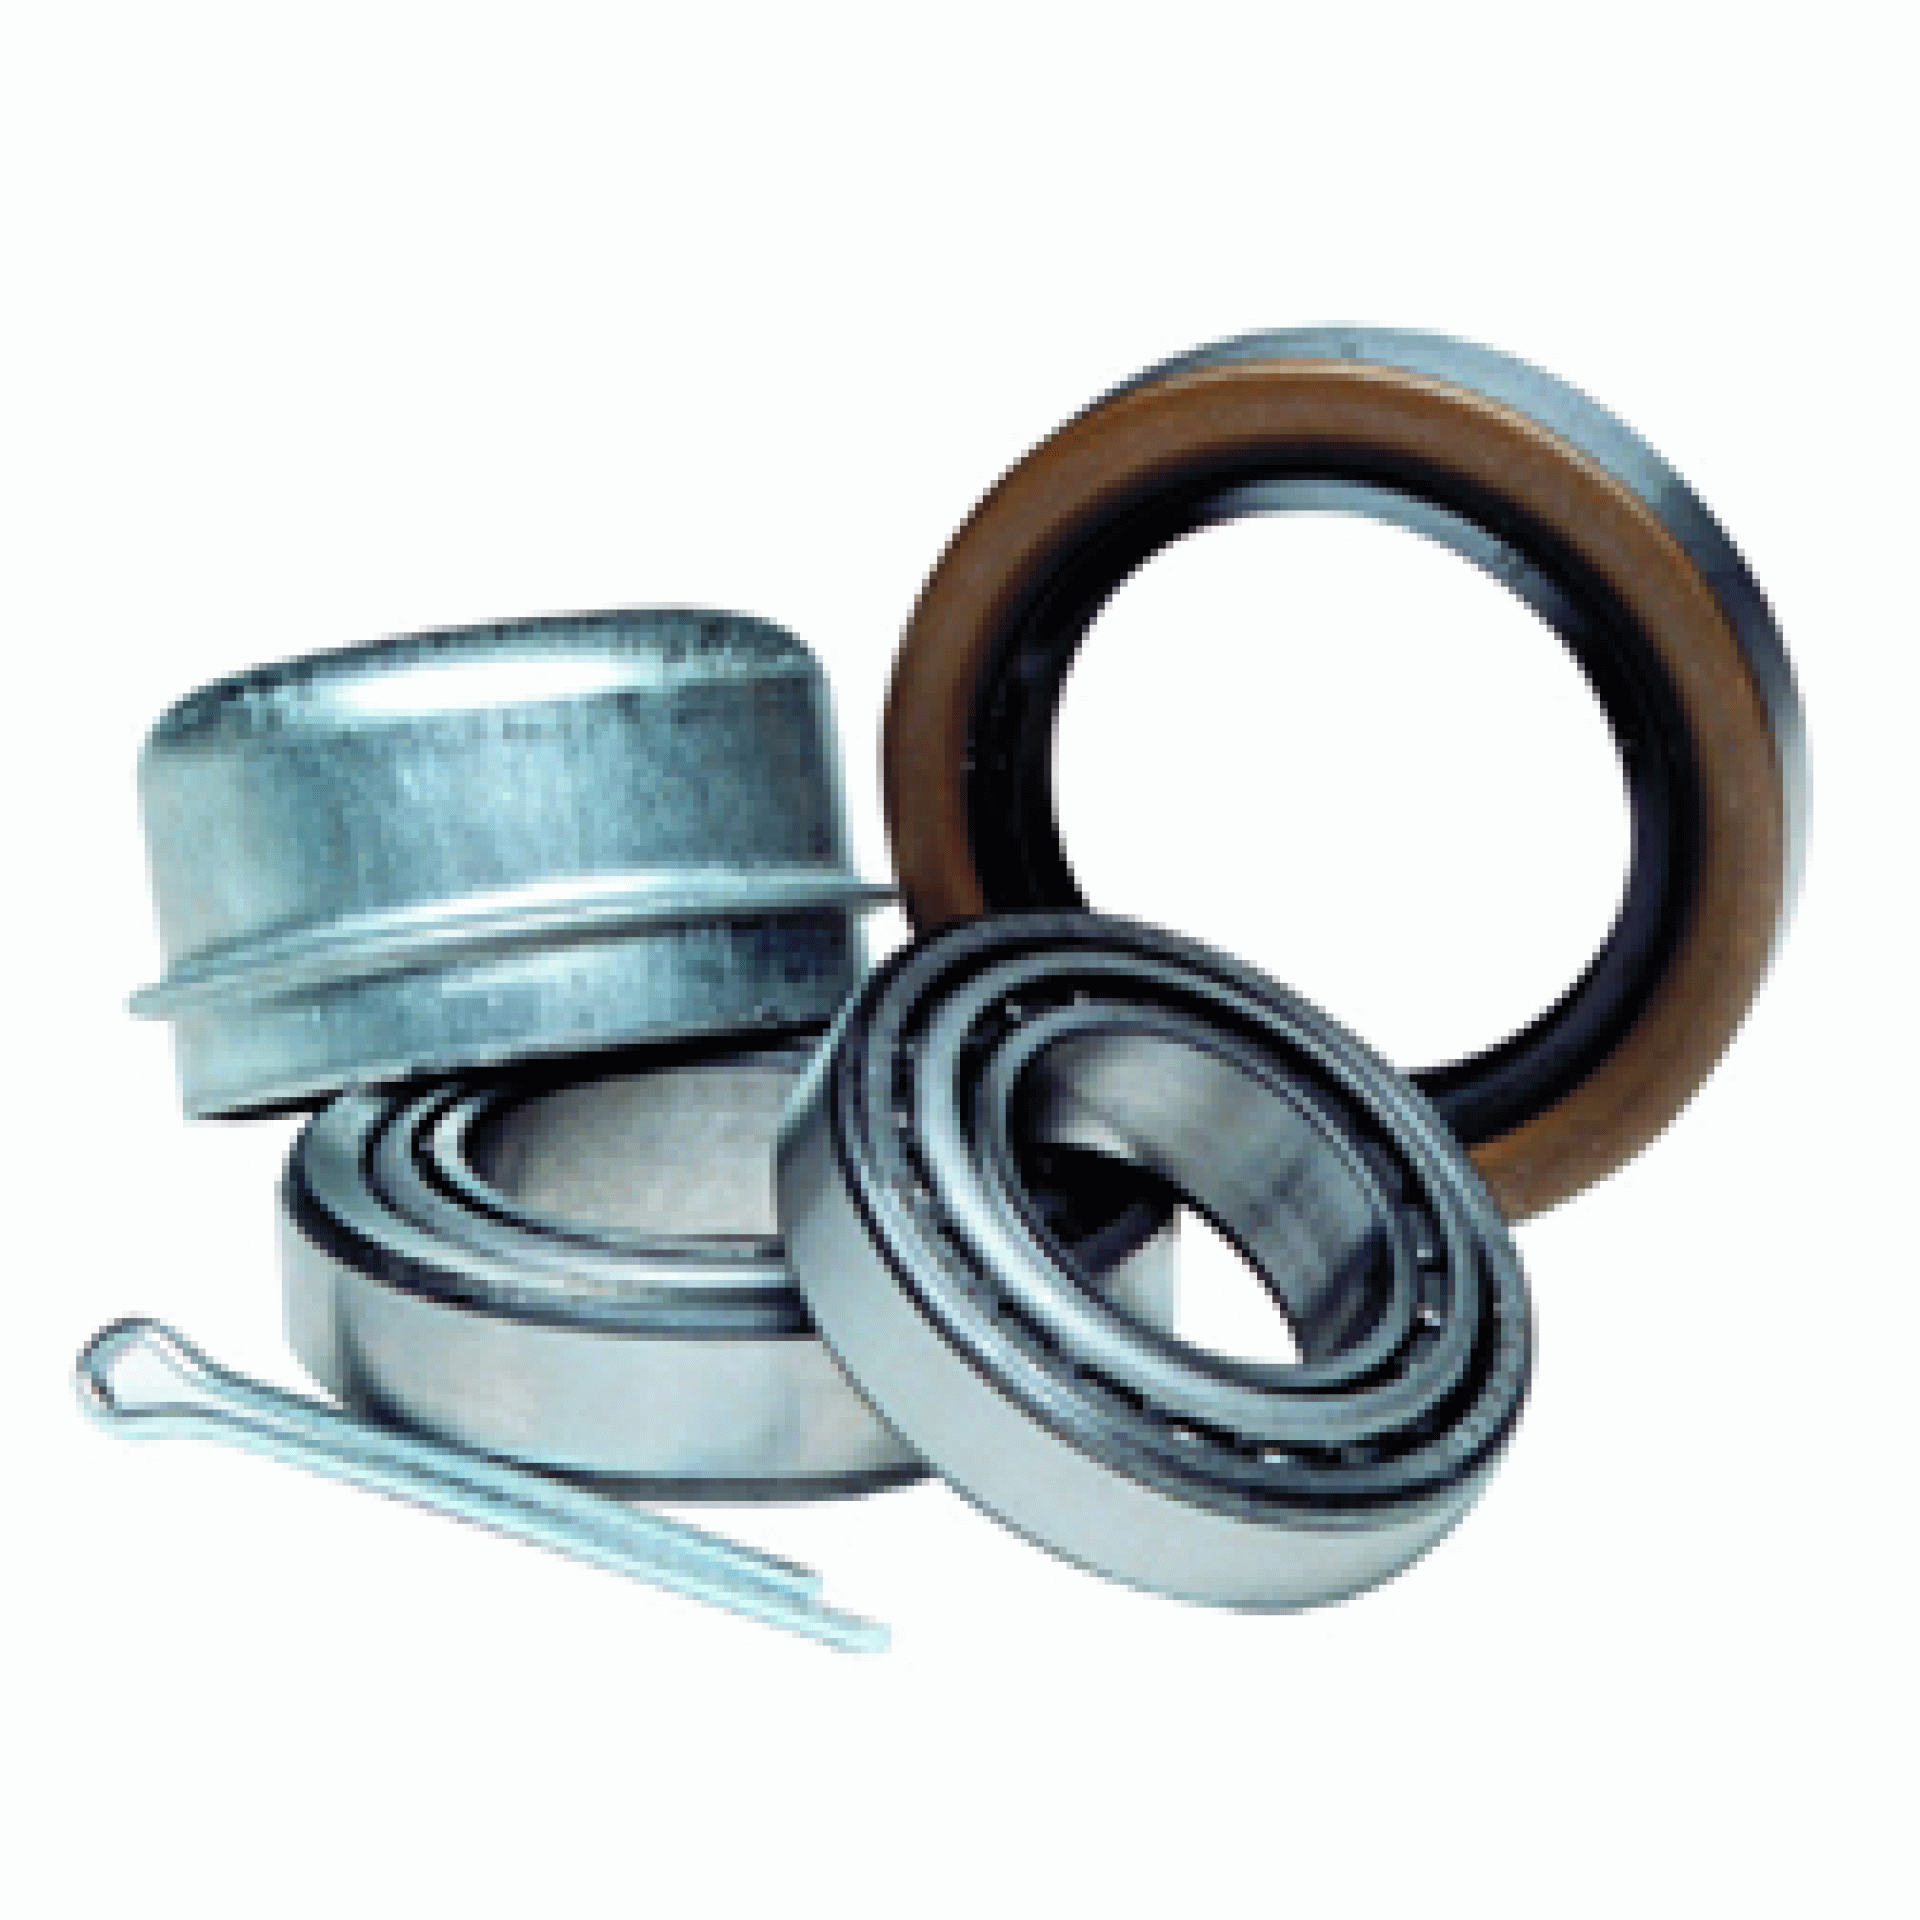 DEXTER MARINE PRODUCTS OF GEORGIA LC | K71-G02-50 | BEARING KIT- 3/4" STRAIGHT SPINDLE W/ DUST CAP LM11949 CONE LM11910 CUP